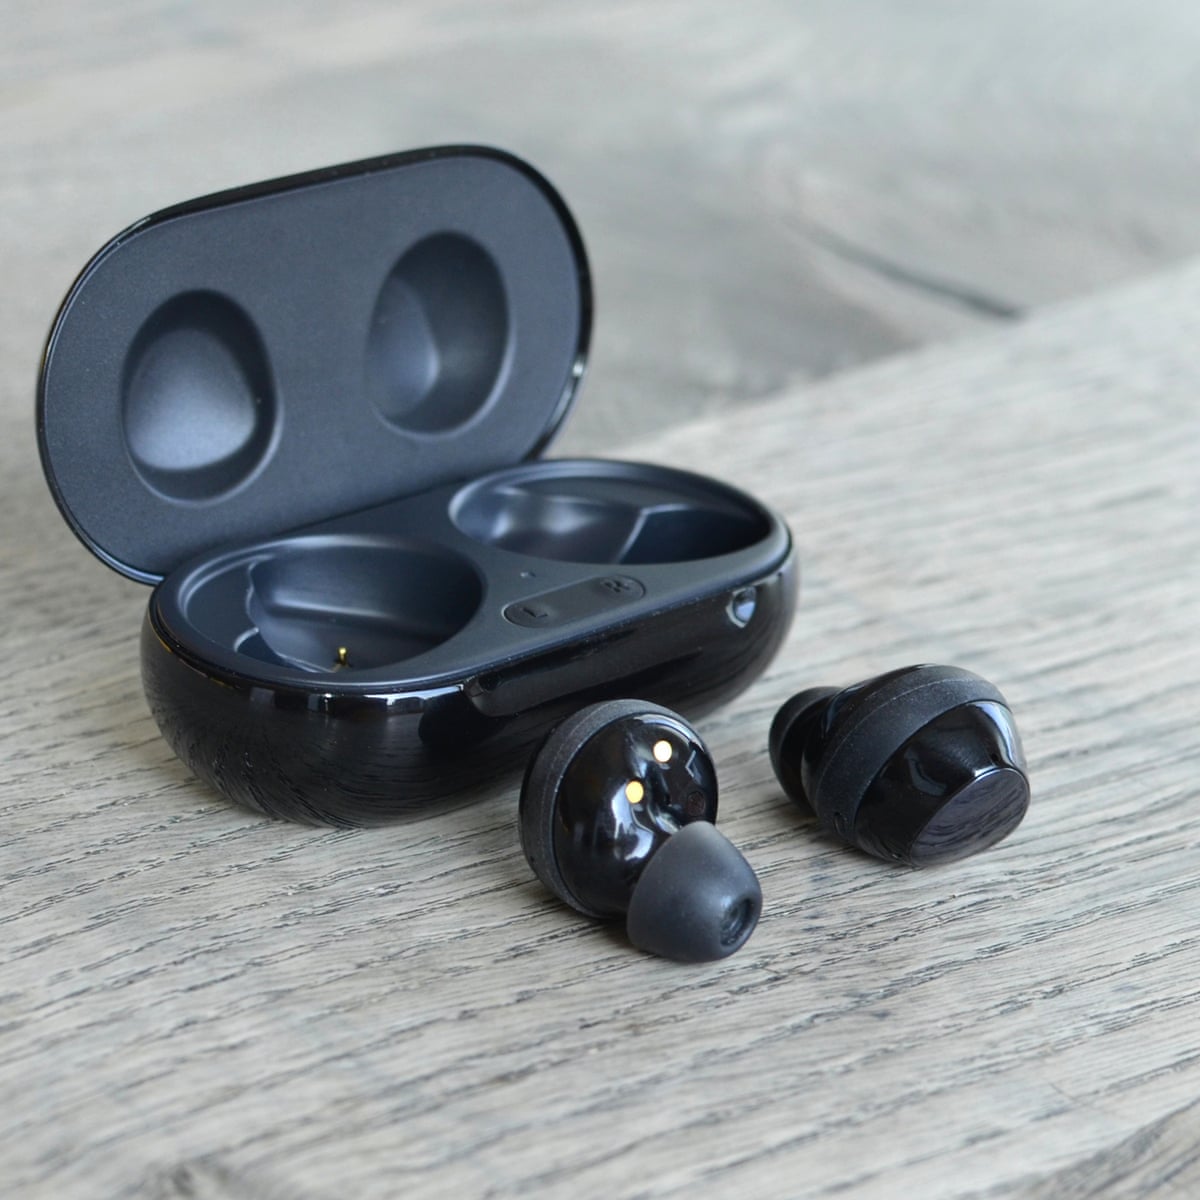 feature image of galaxy buds plus